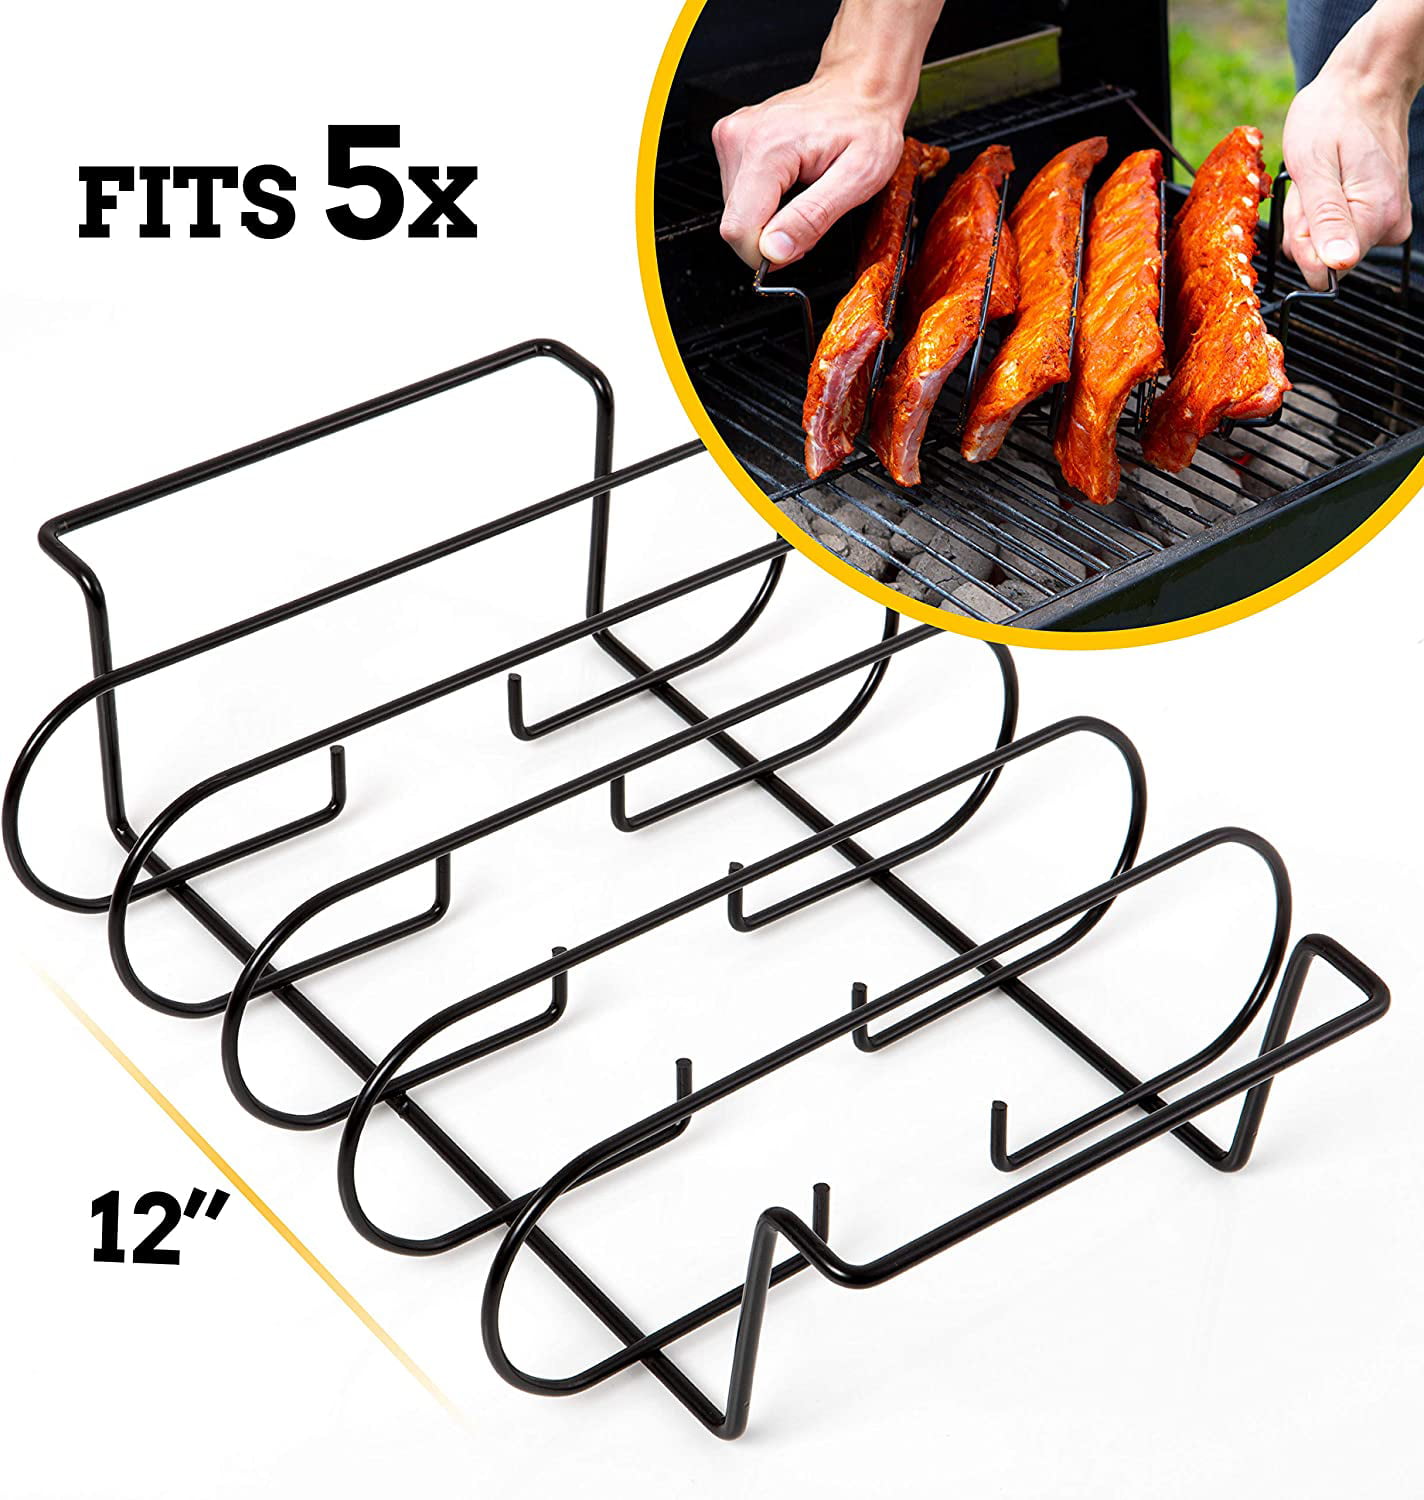 Rib Rack,Stainless Steel Roasting Stand Holds 5 Ribs for Grilling Barbecuing,Non-Stick BBQ Rib Rack for Gas Smoker or Charcoal Grill 